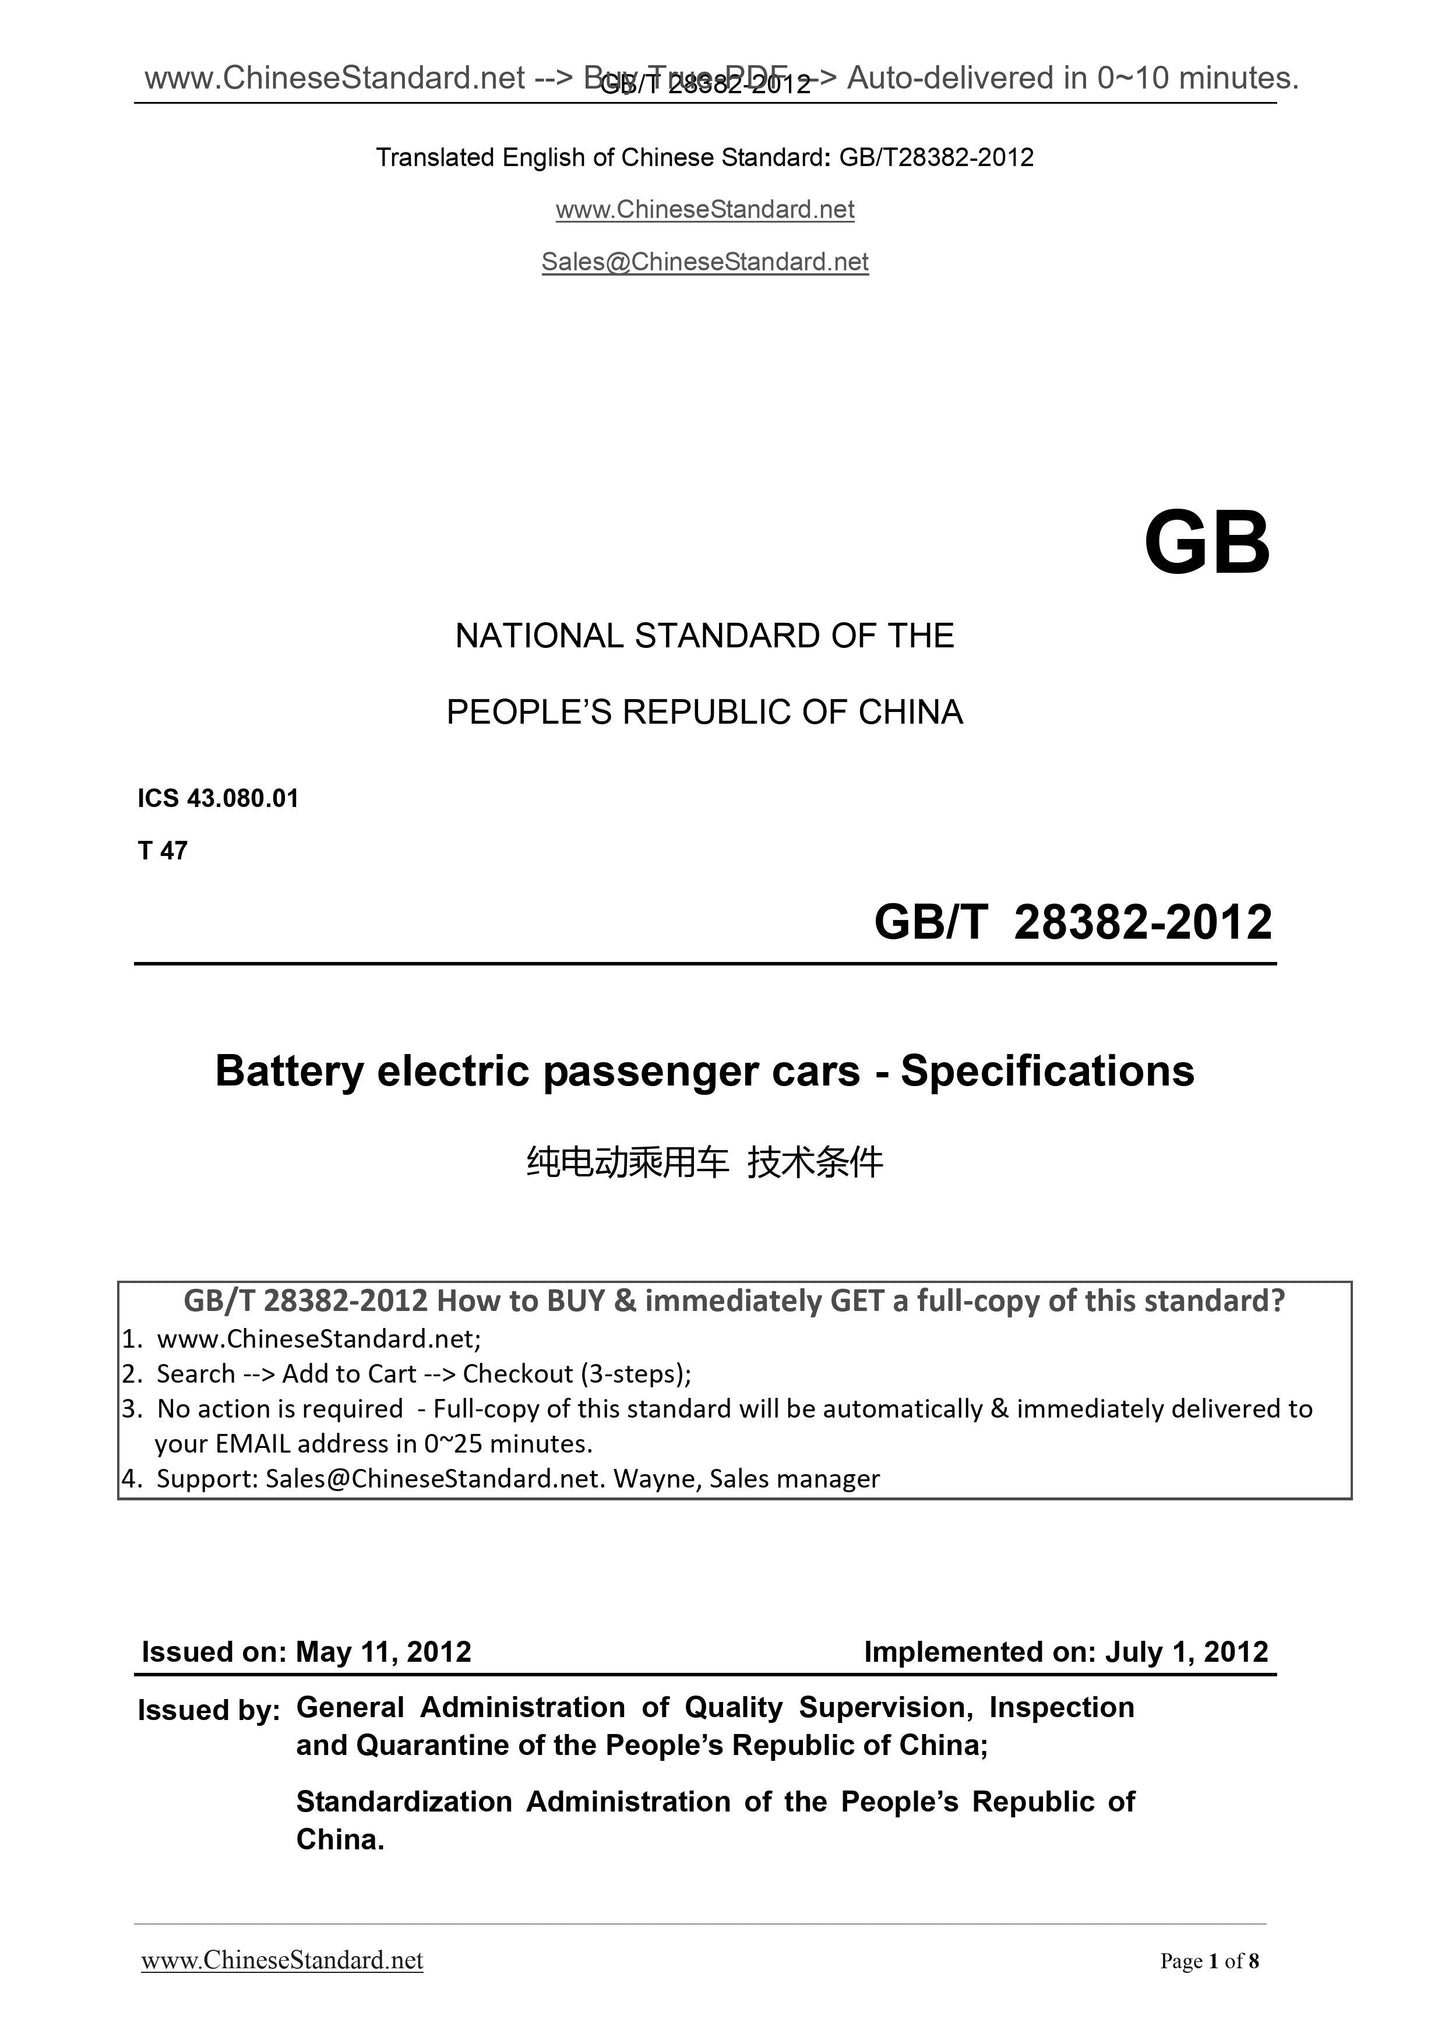 GB/T 28382-2012 Page 1